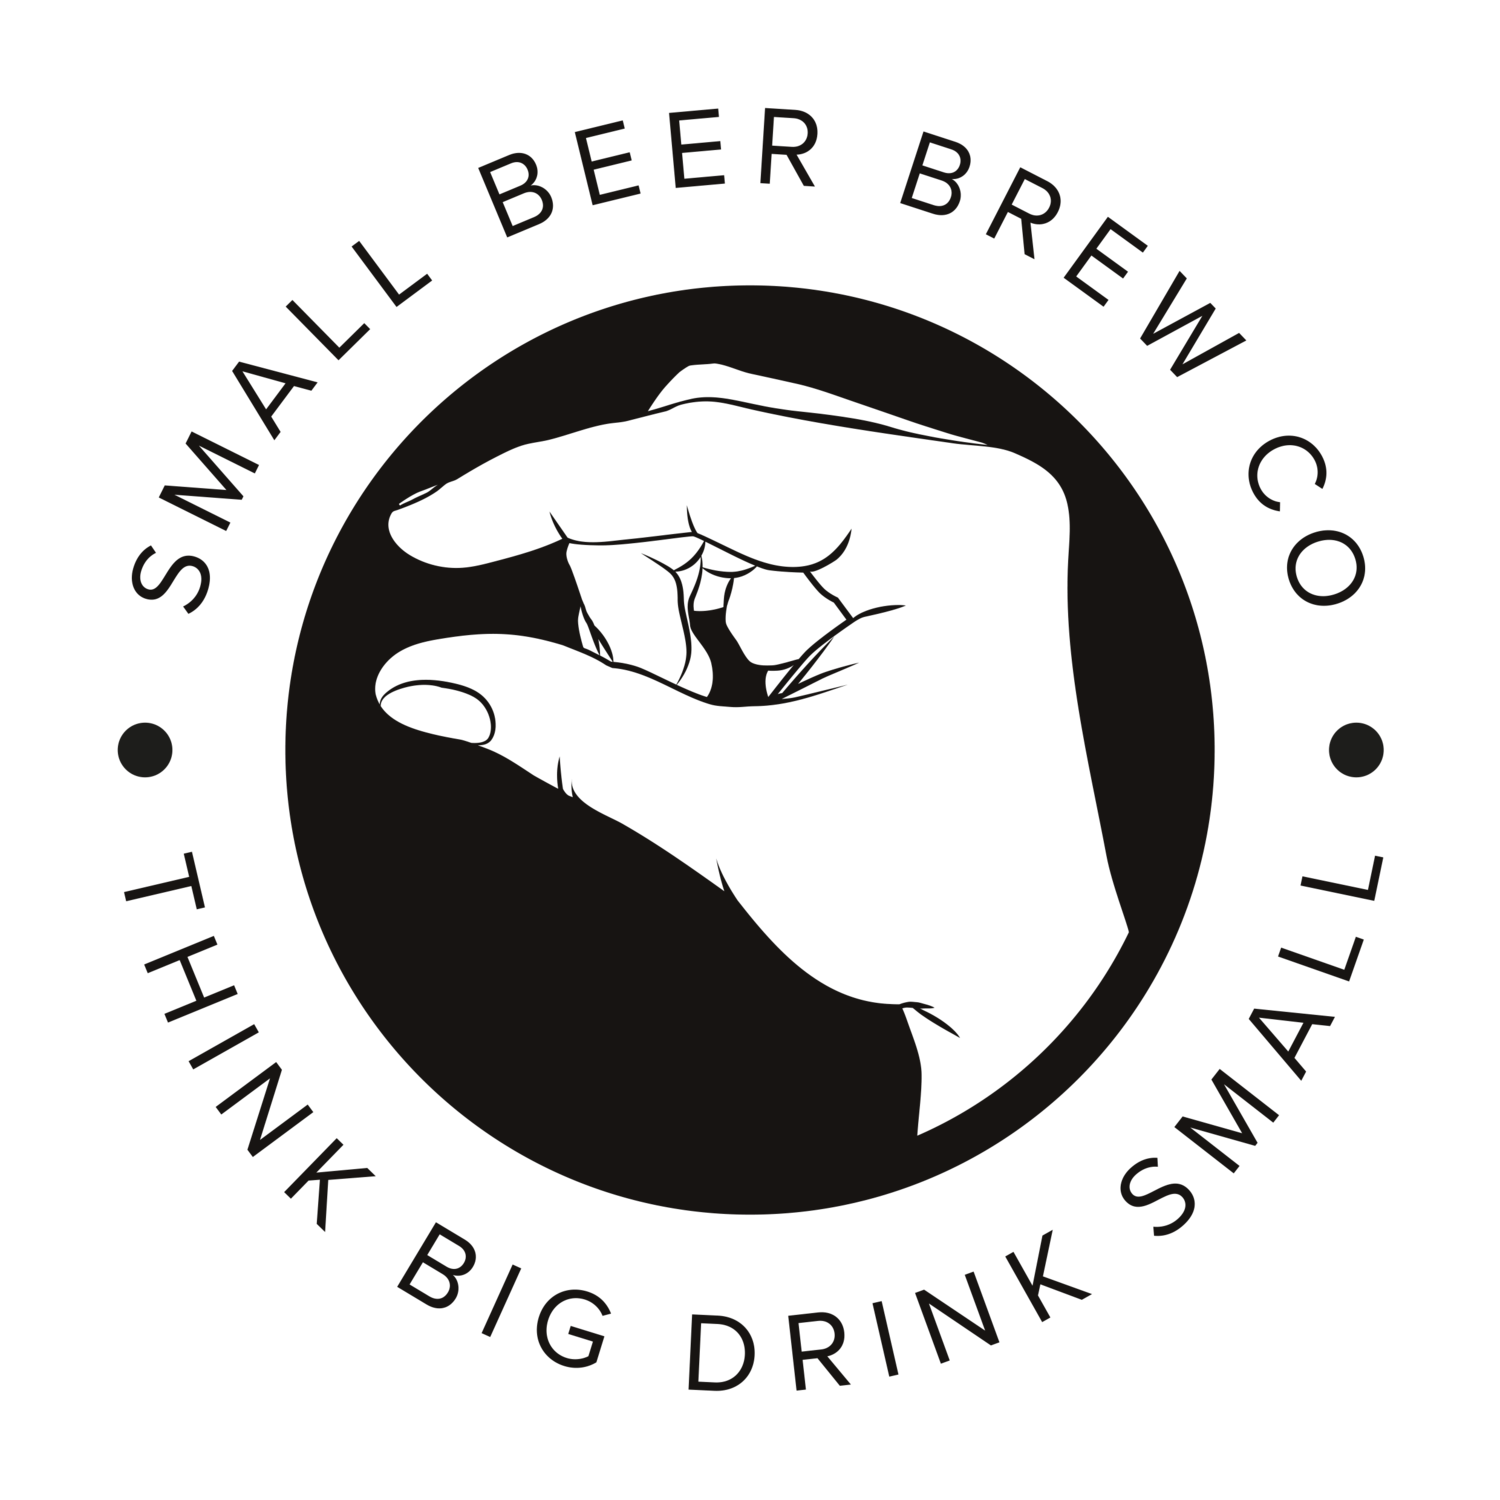 Hand Beer Logo - SMALL BEER BREW CO